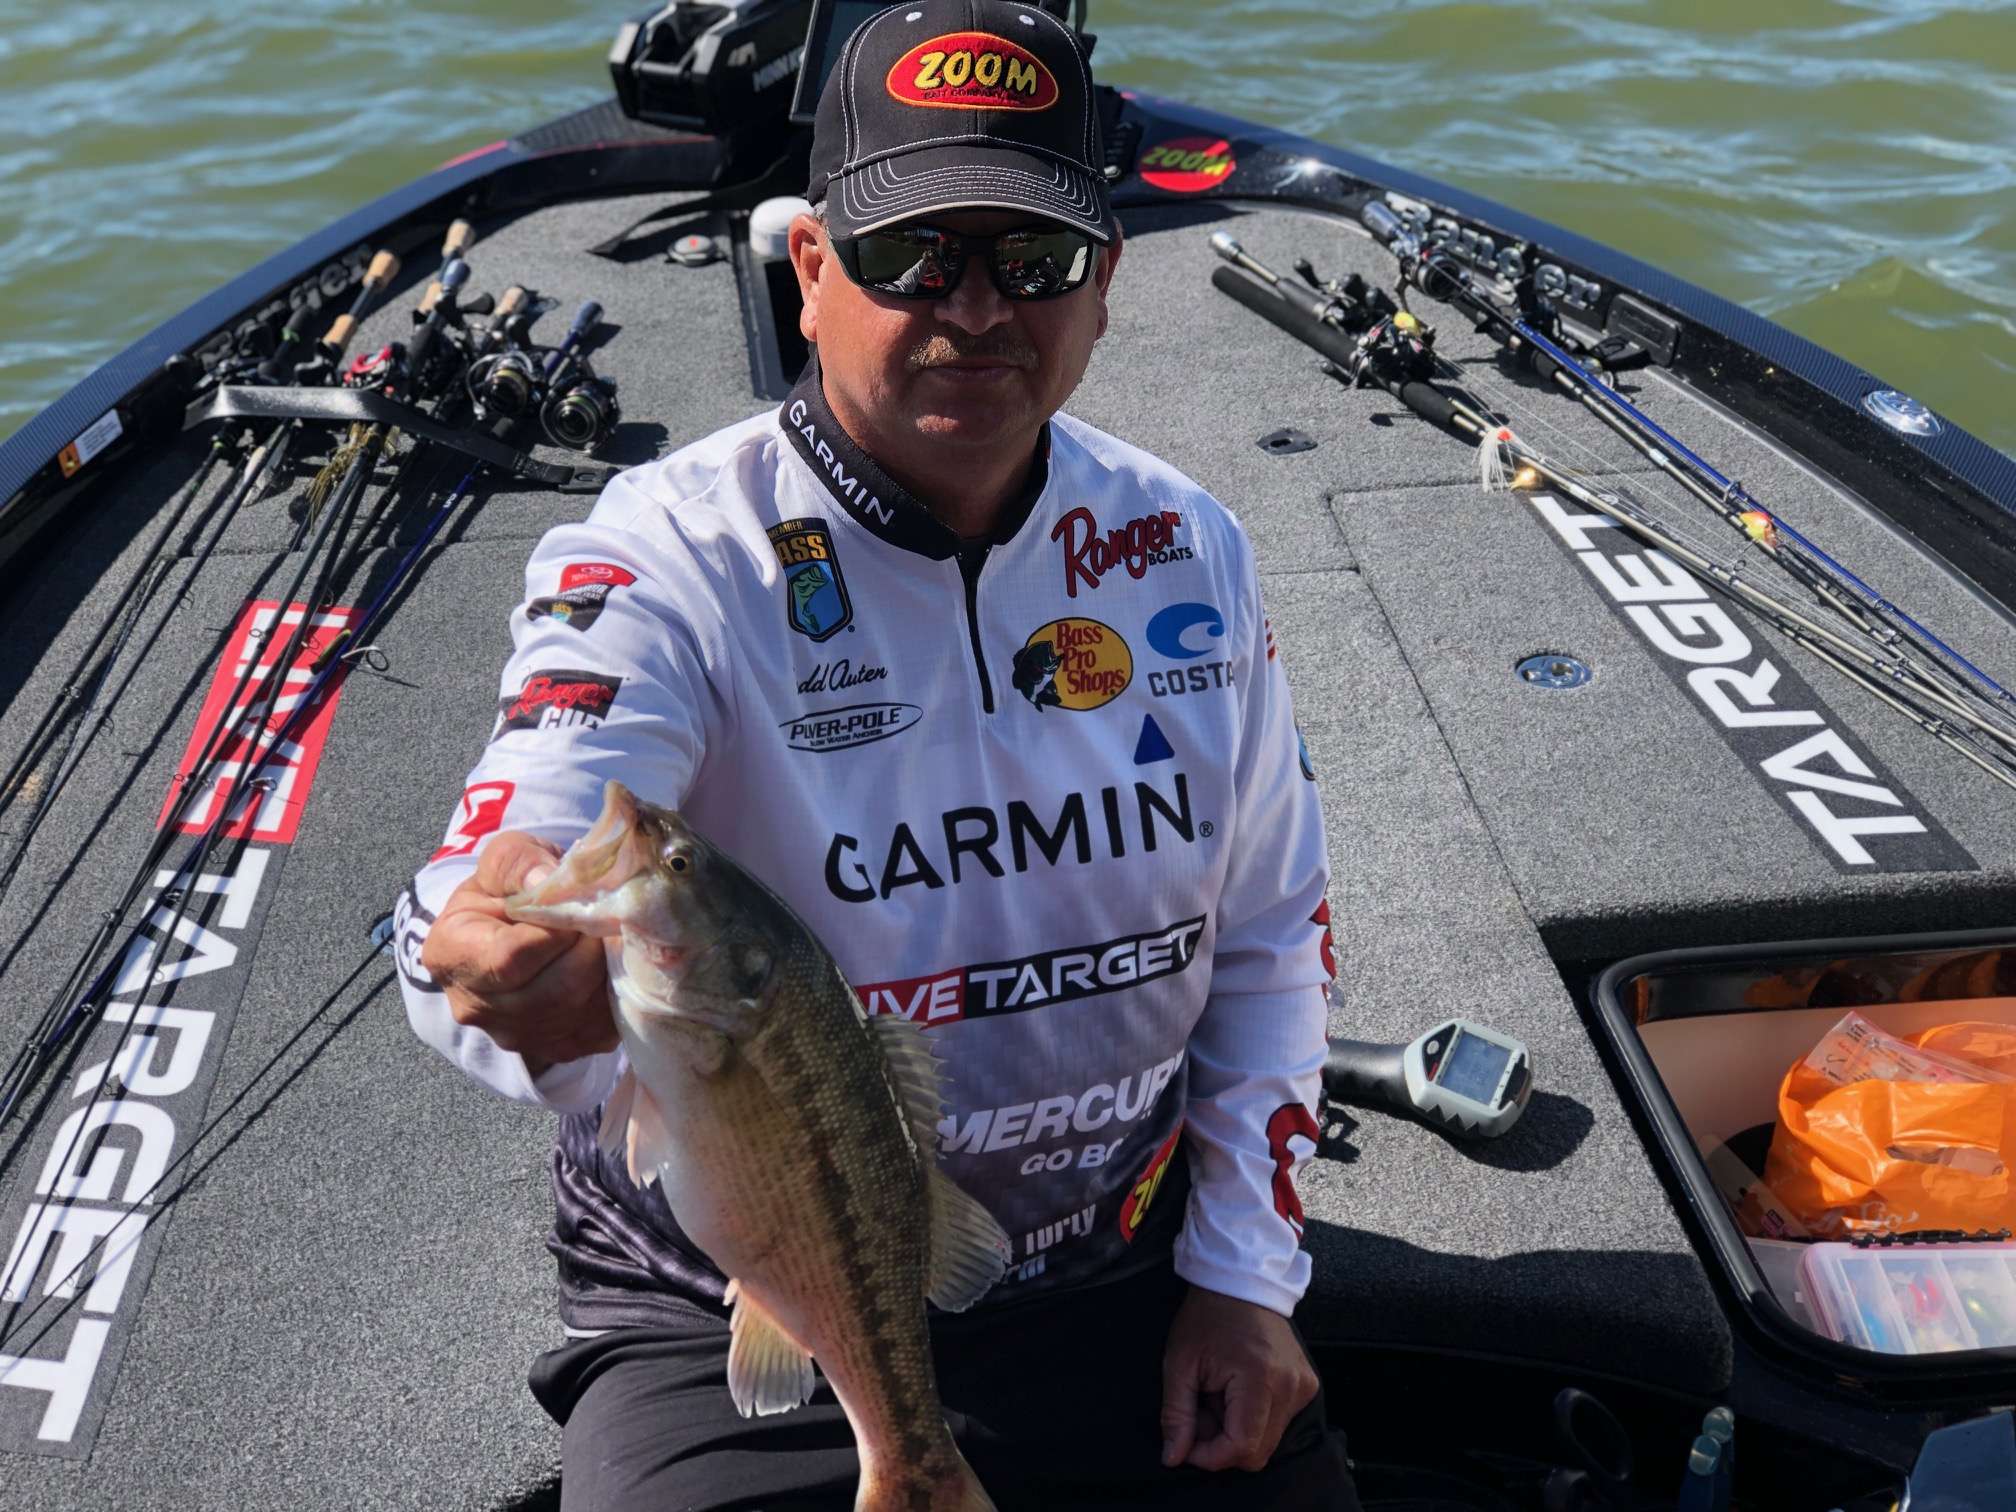 Another upgrade for Todd Auten. Persistence with the crankbait has paid off for him as the day goes by. 